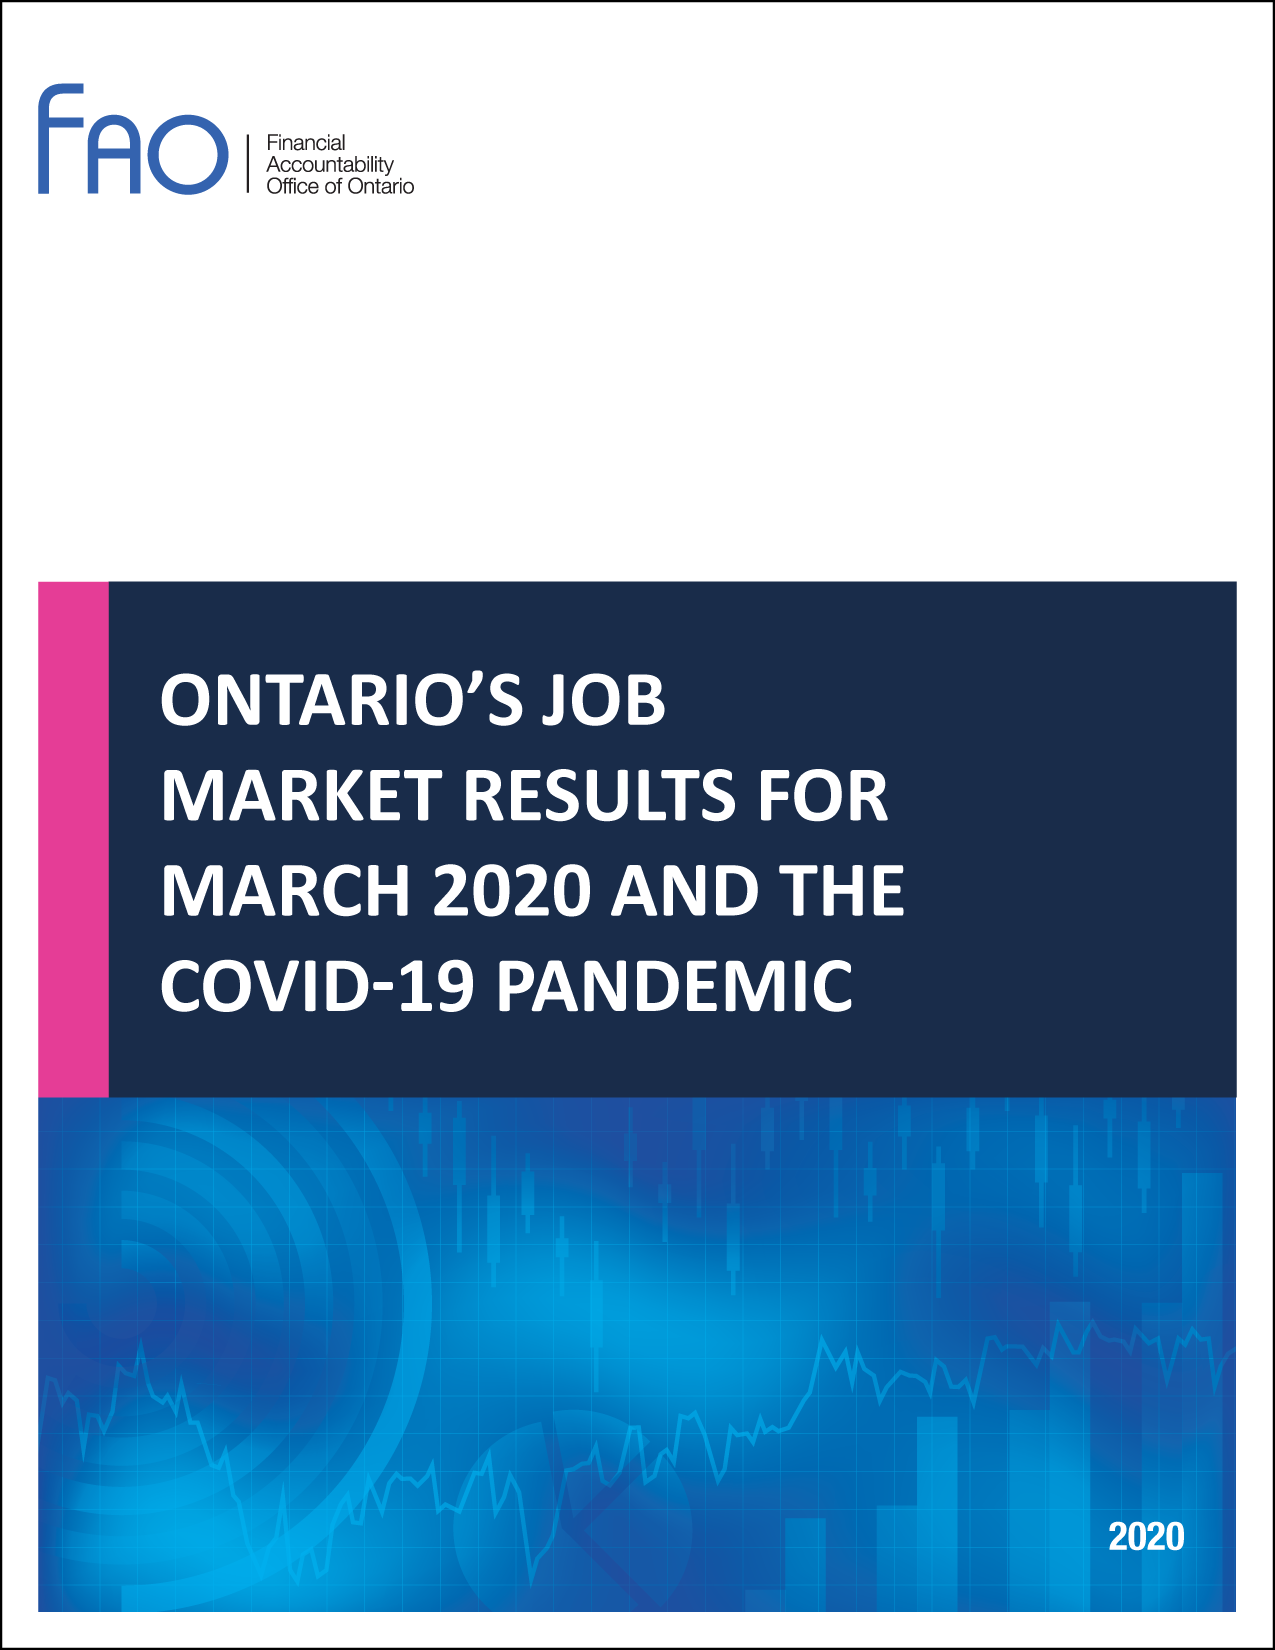 Ontario's Job Market Results for March 2020 and the COVID-19 Pandemic